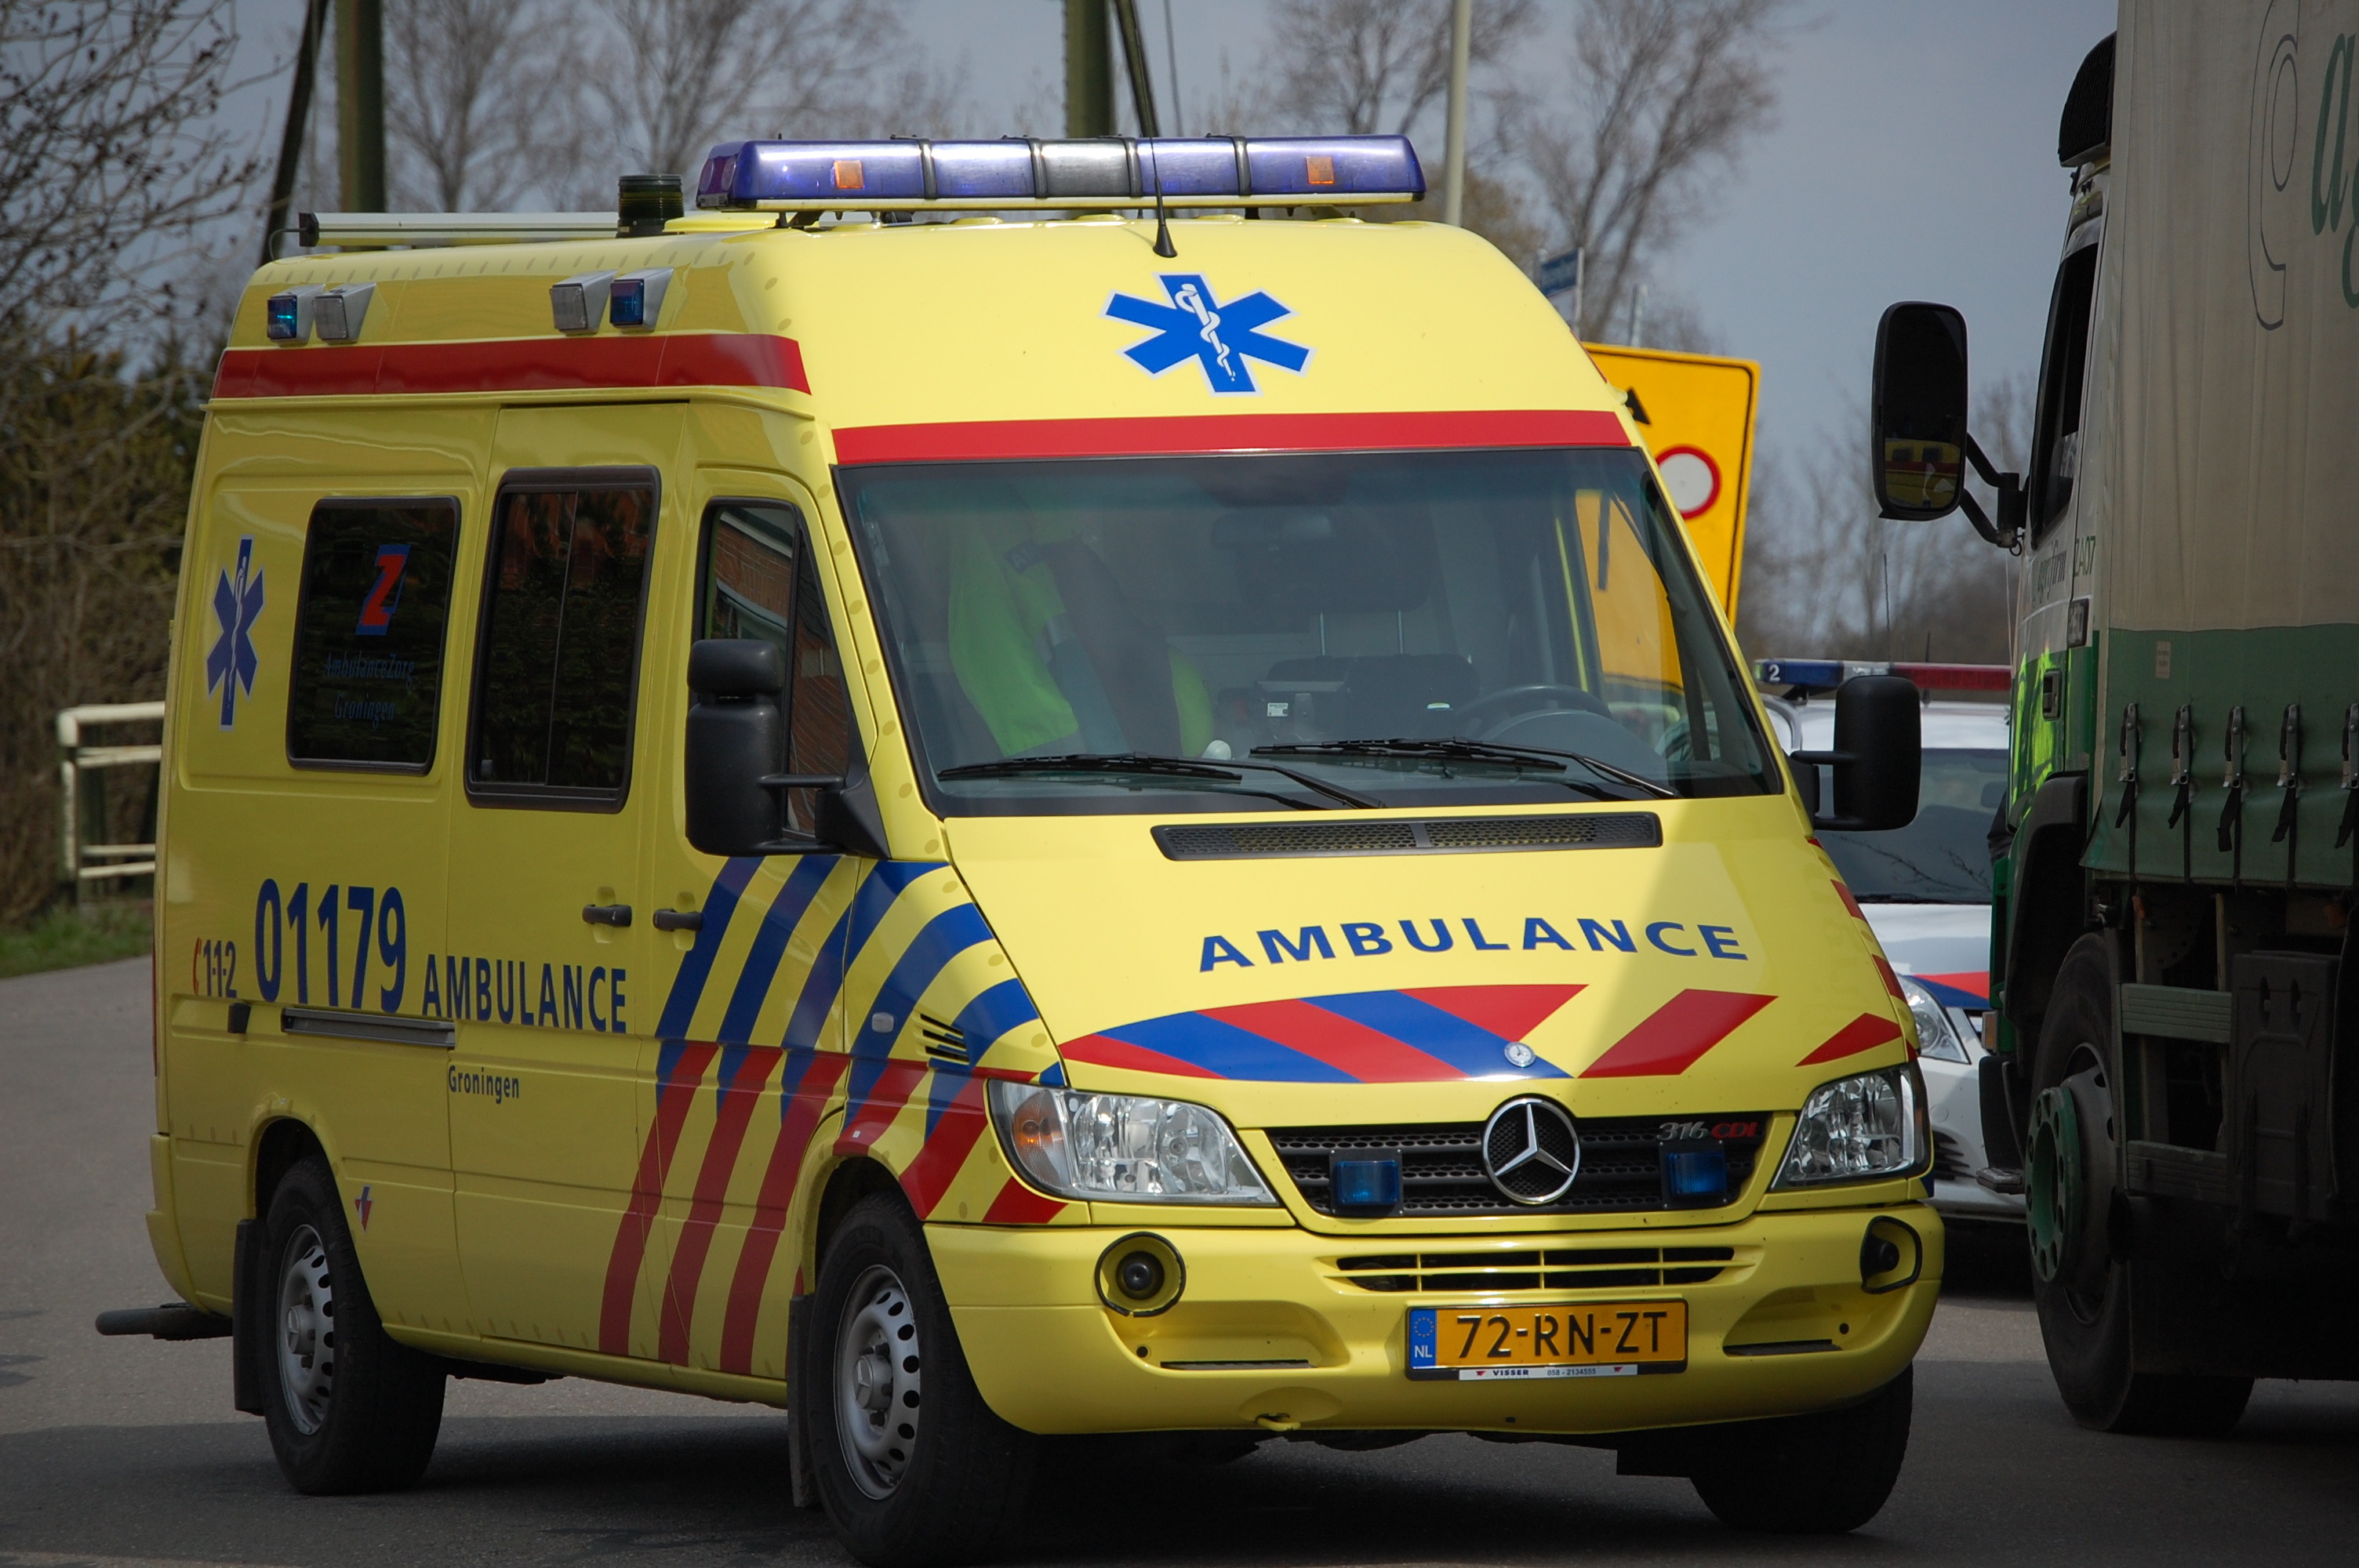 3008x2000 Gallery For > Ambulances Wallpaper